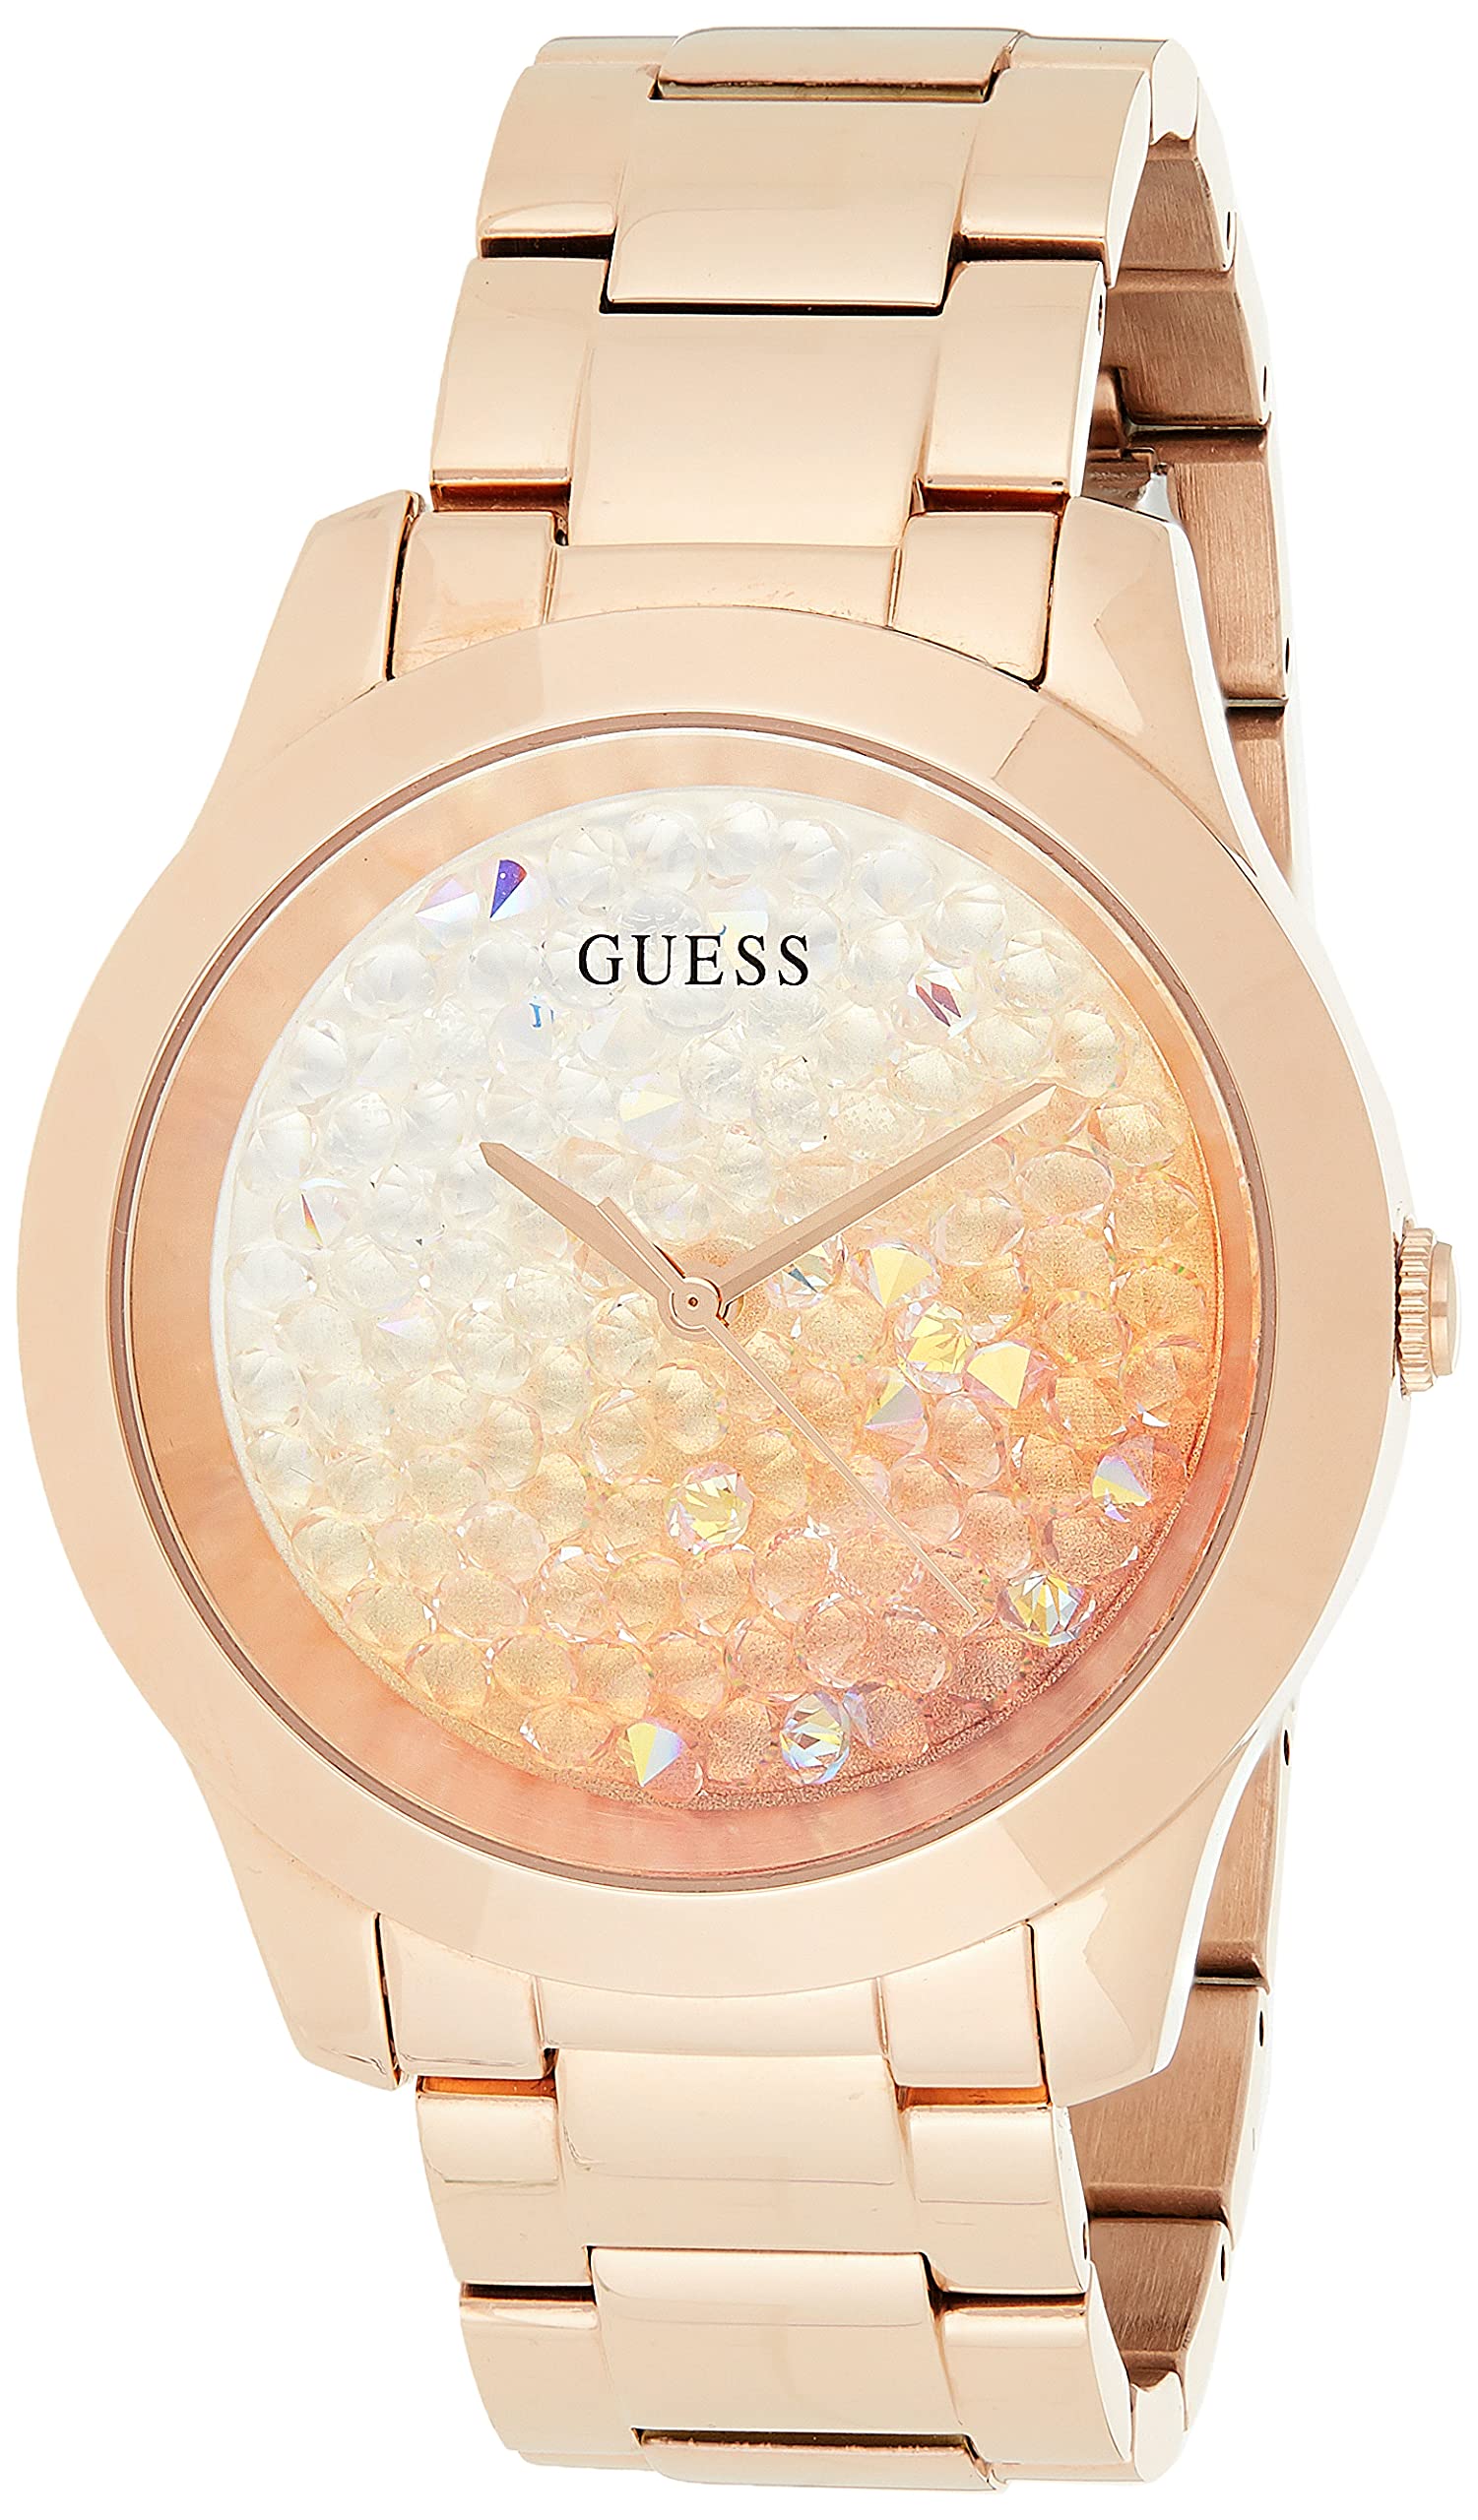 GUESS 42mm Stainless Steel Watch with Crystal Dial